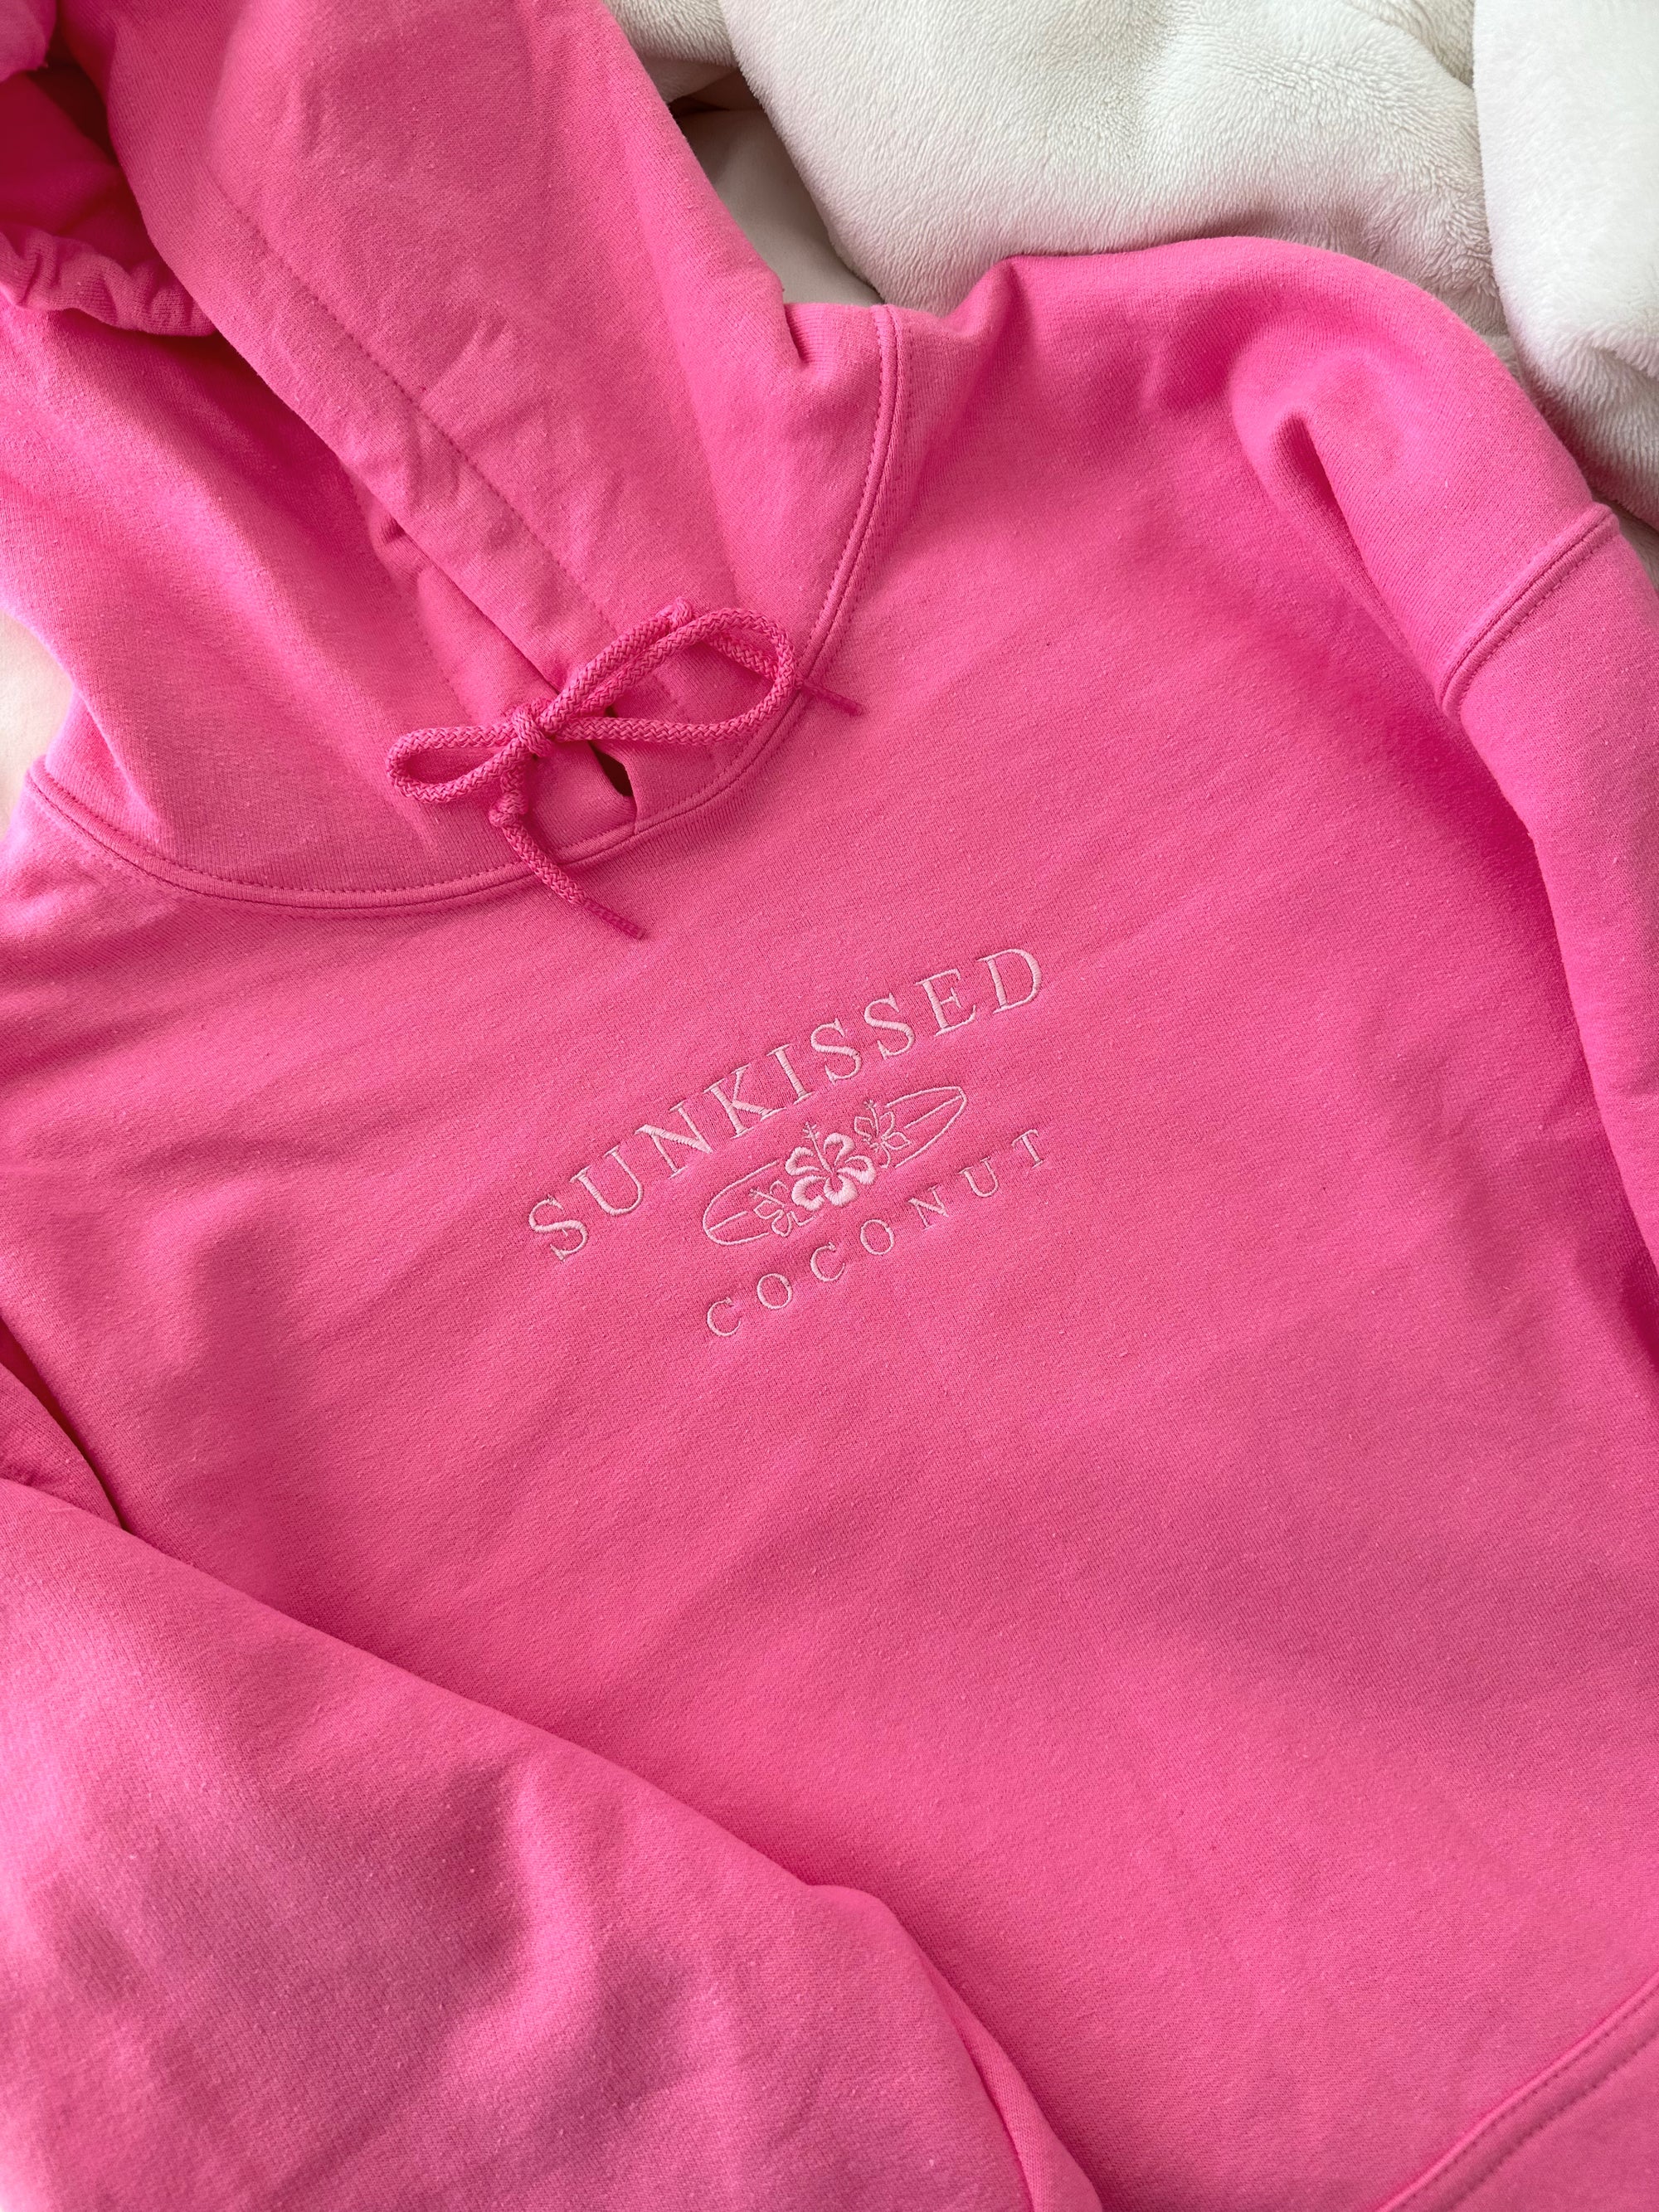 Pink Embroider Sunkissedcoconut Hoodie